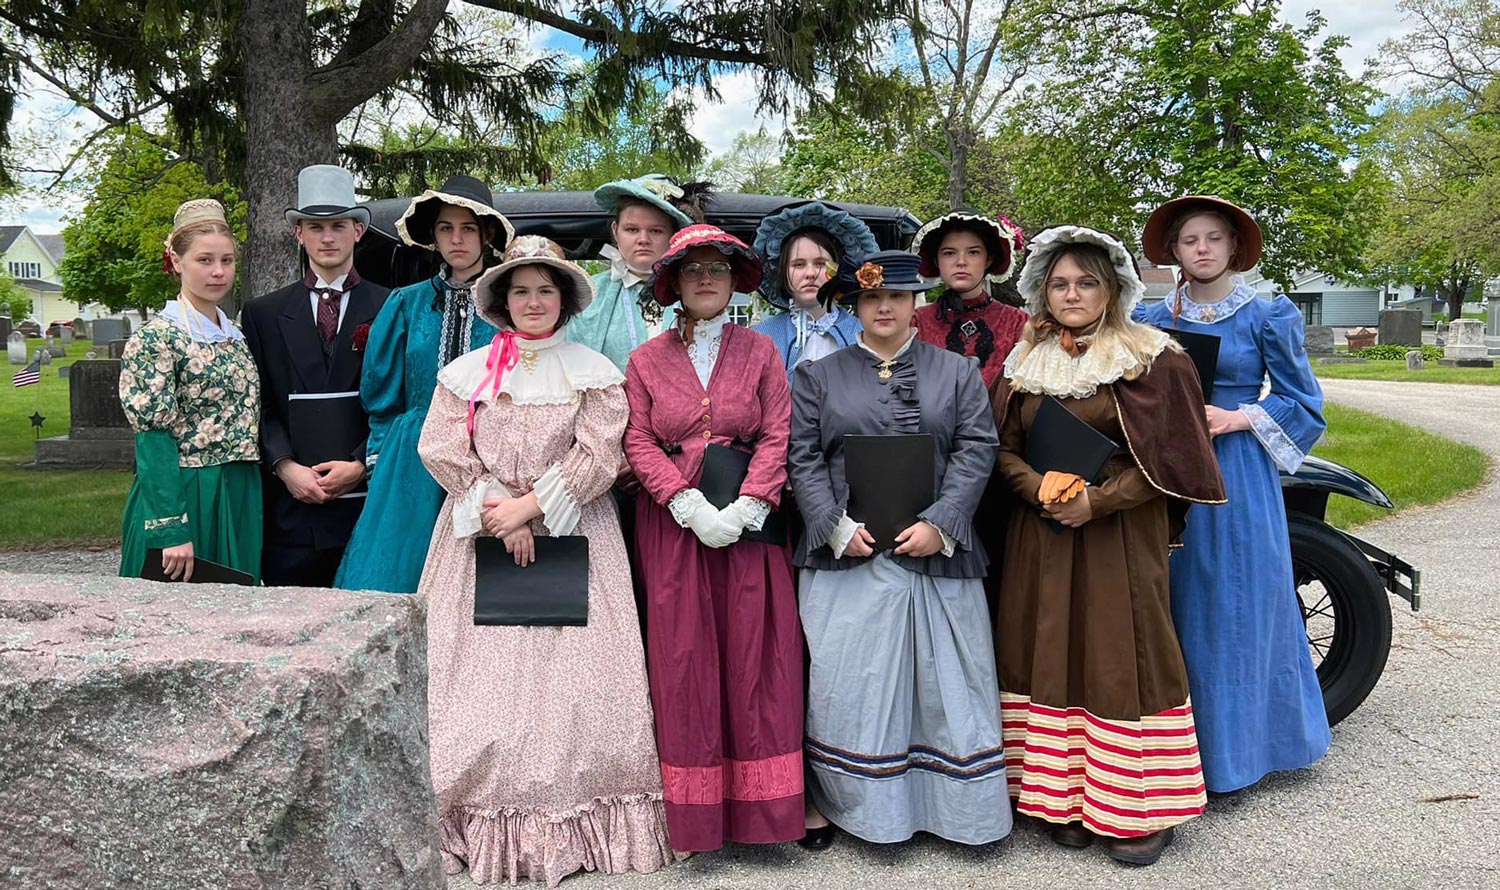 Students in period costume at cemetery